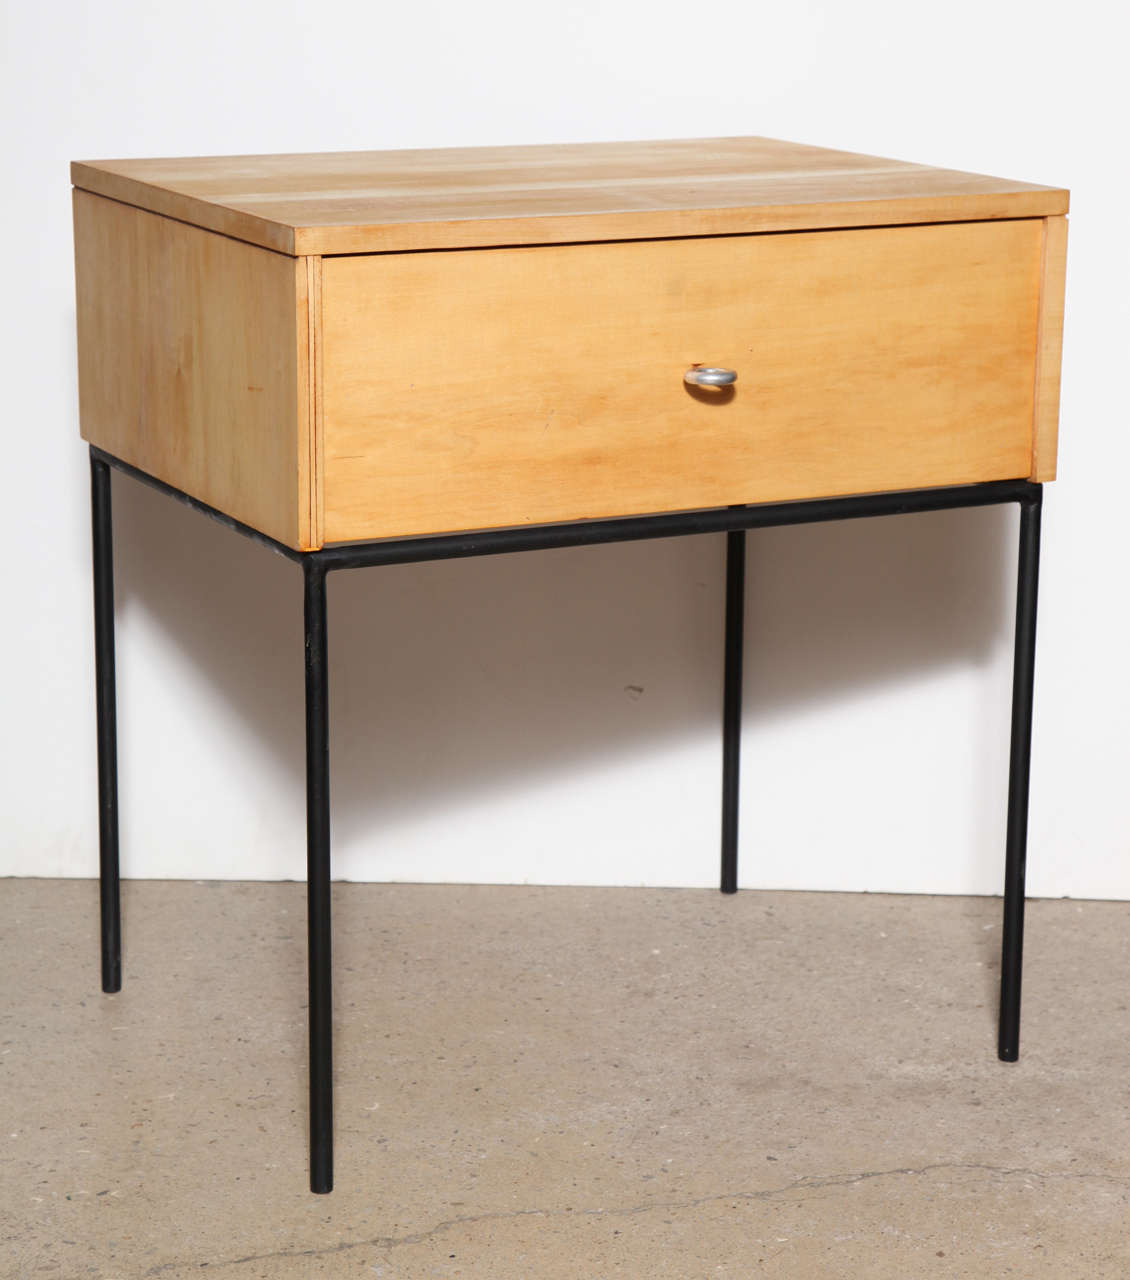 Early 1950s Paul McCobb Planner Group for Winchendon Furniture Company Birch End Tables, Side Tables. Featuring Light solid Birch with extra-large drawers, rounded Black enameled Wrought Iron framework and original round Aluminum ring pull. Deep